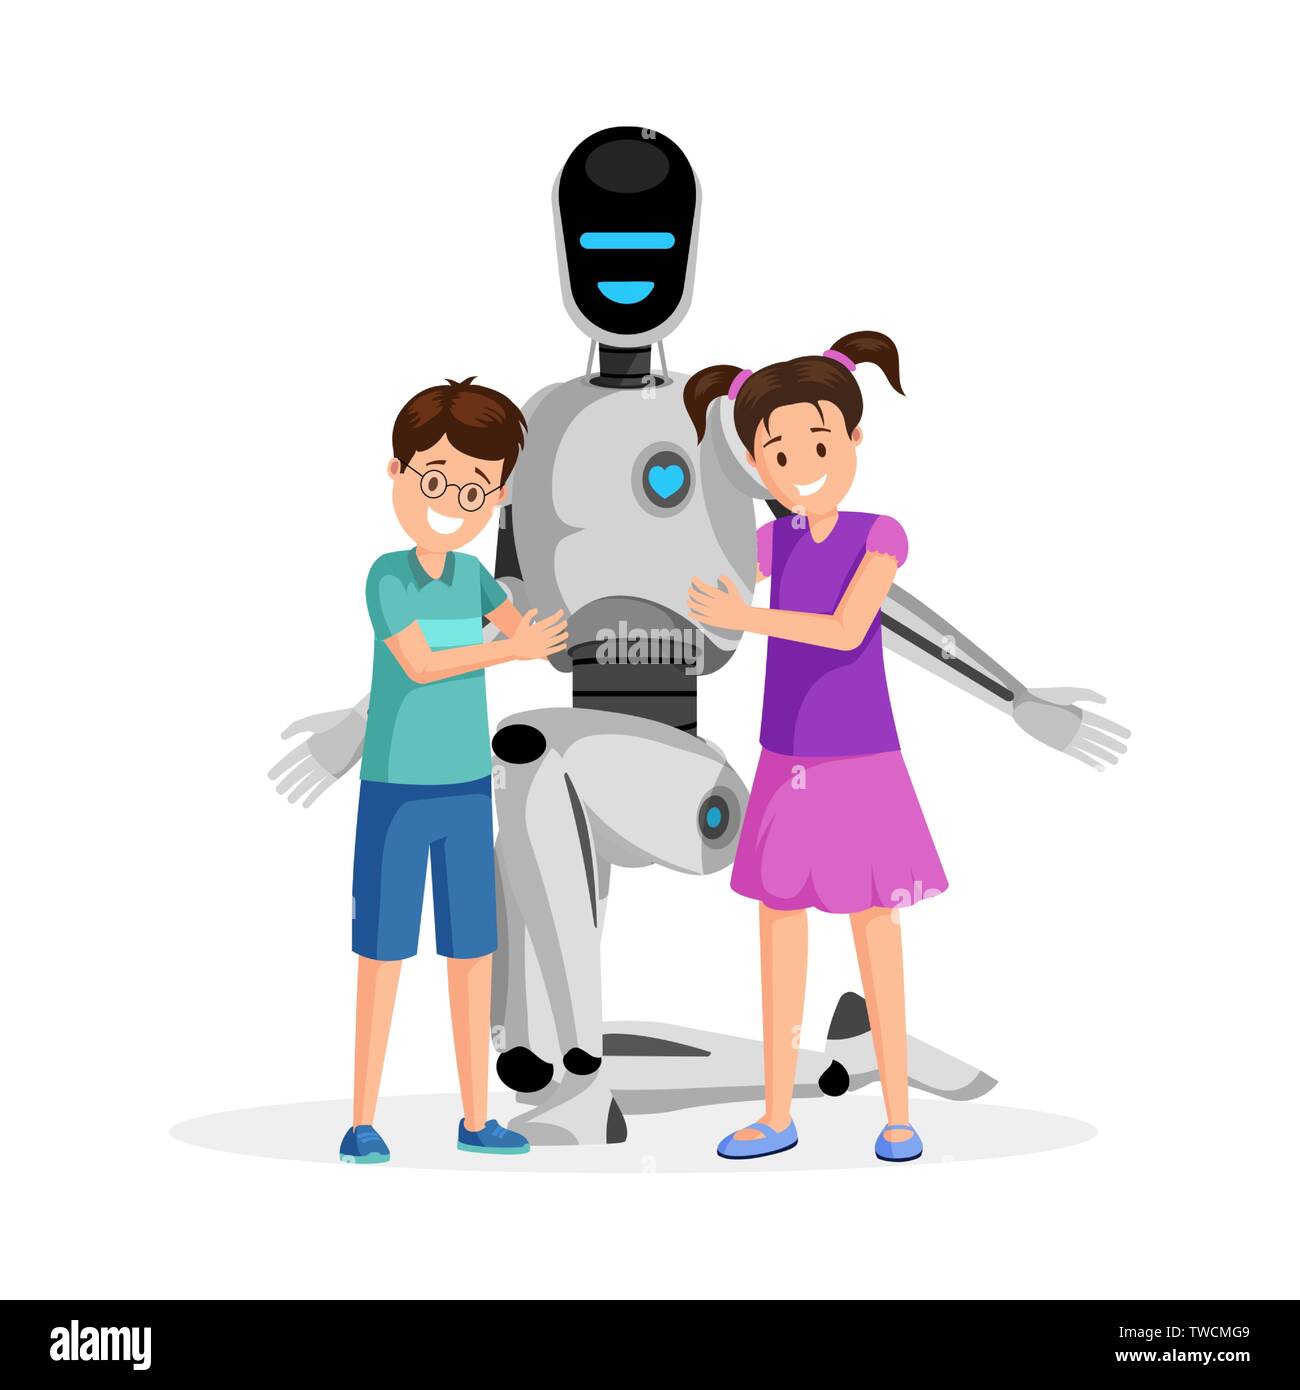 Robot with happy children flat vector illustration. Little boy and girl with artificial babysitter cartoon characters. Futuristic babysitting, childcare service innovation, family friendly technology Stock Vector